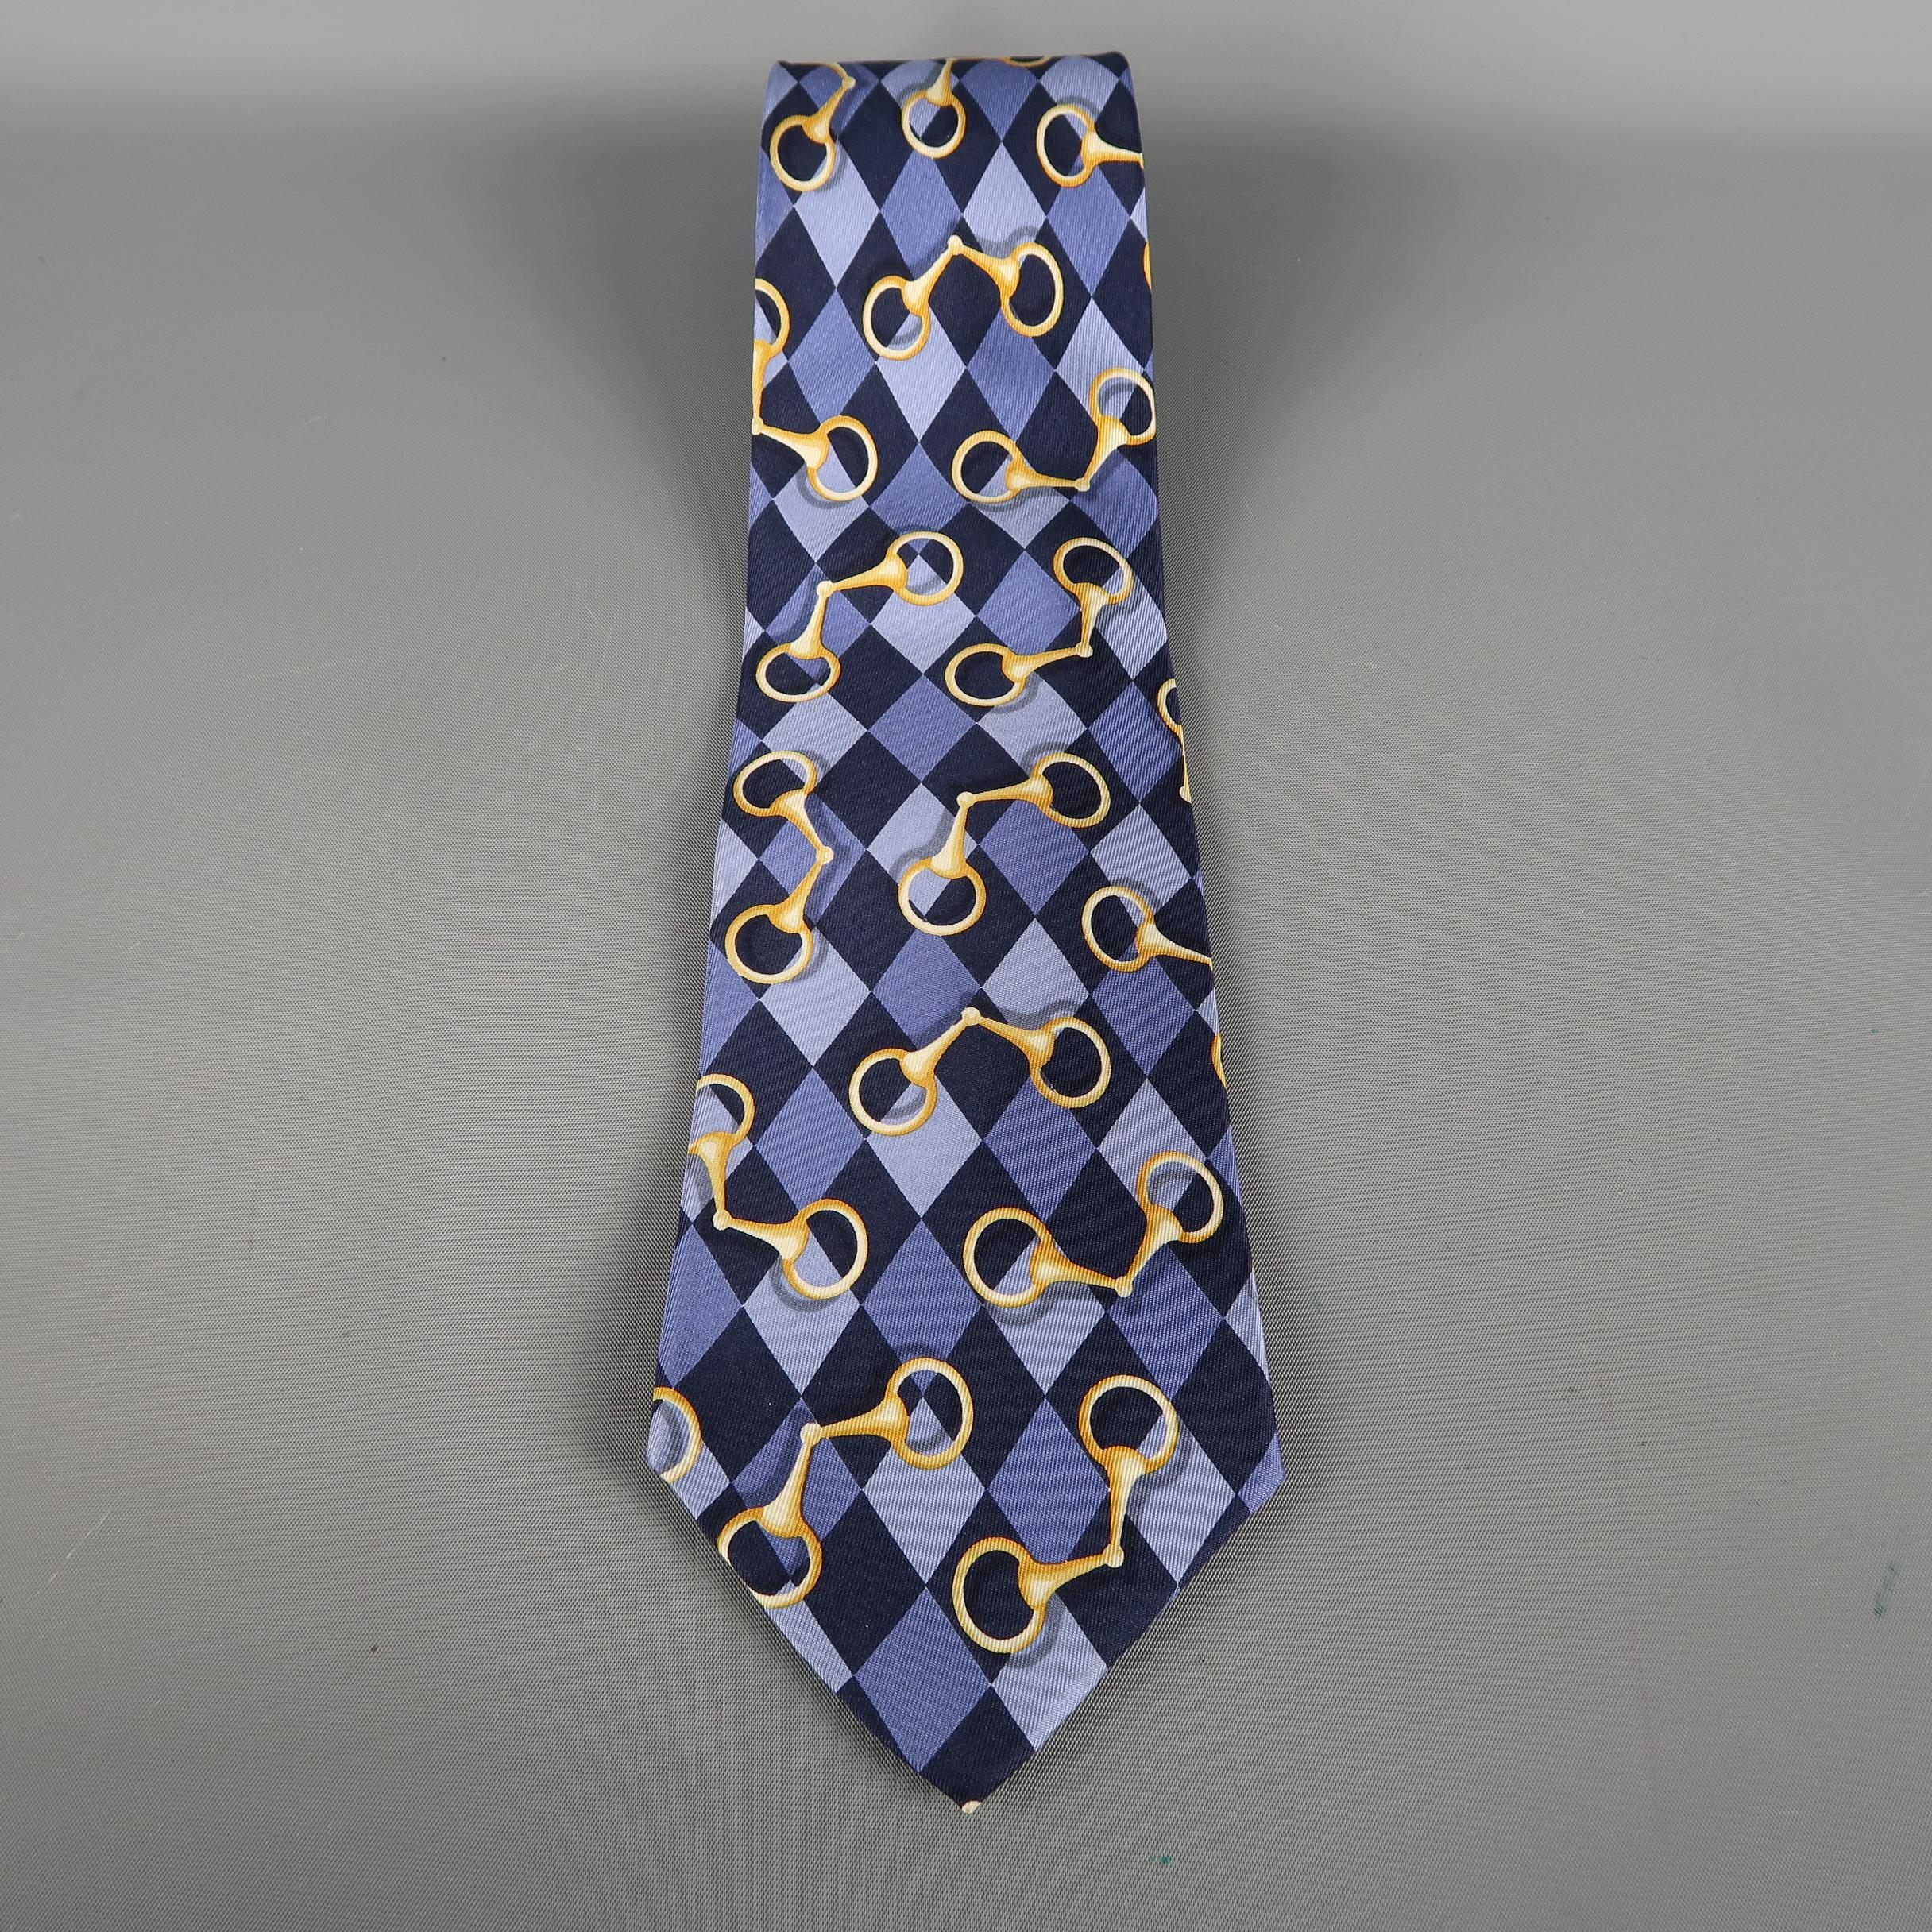 GUCCI tie come in purple silk  with an all over rhombus print. Made in Italy.
 
Excellent Pre-Owned Condition.
 
Width: 4 in.